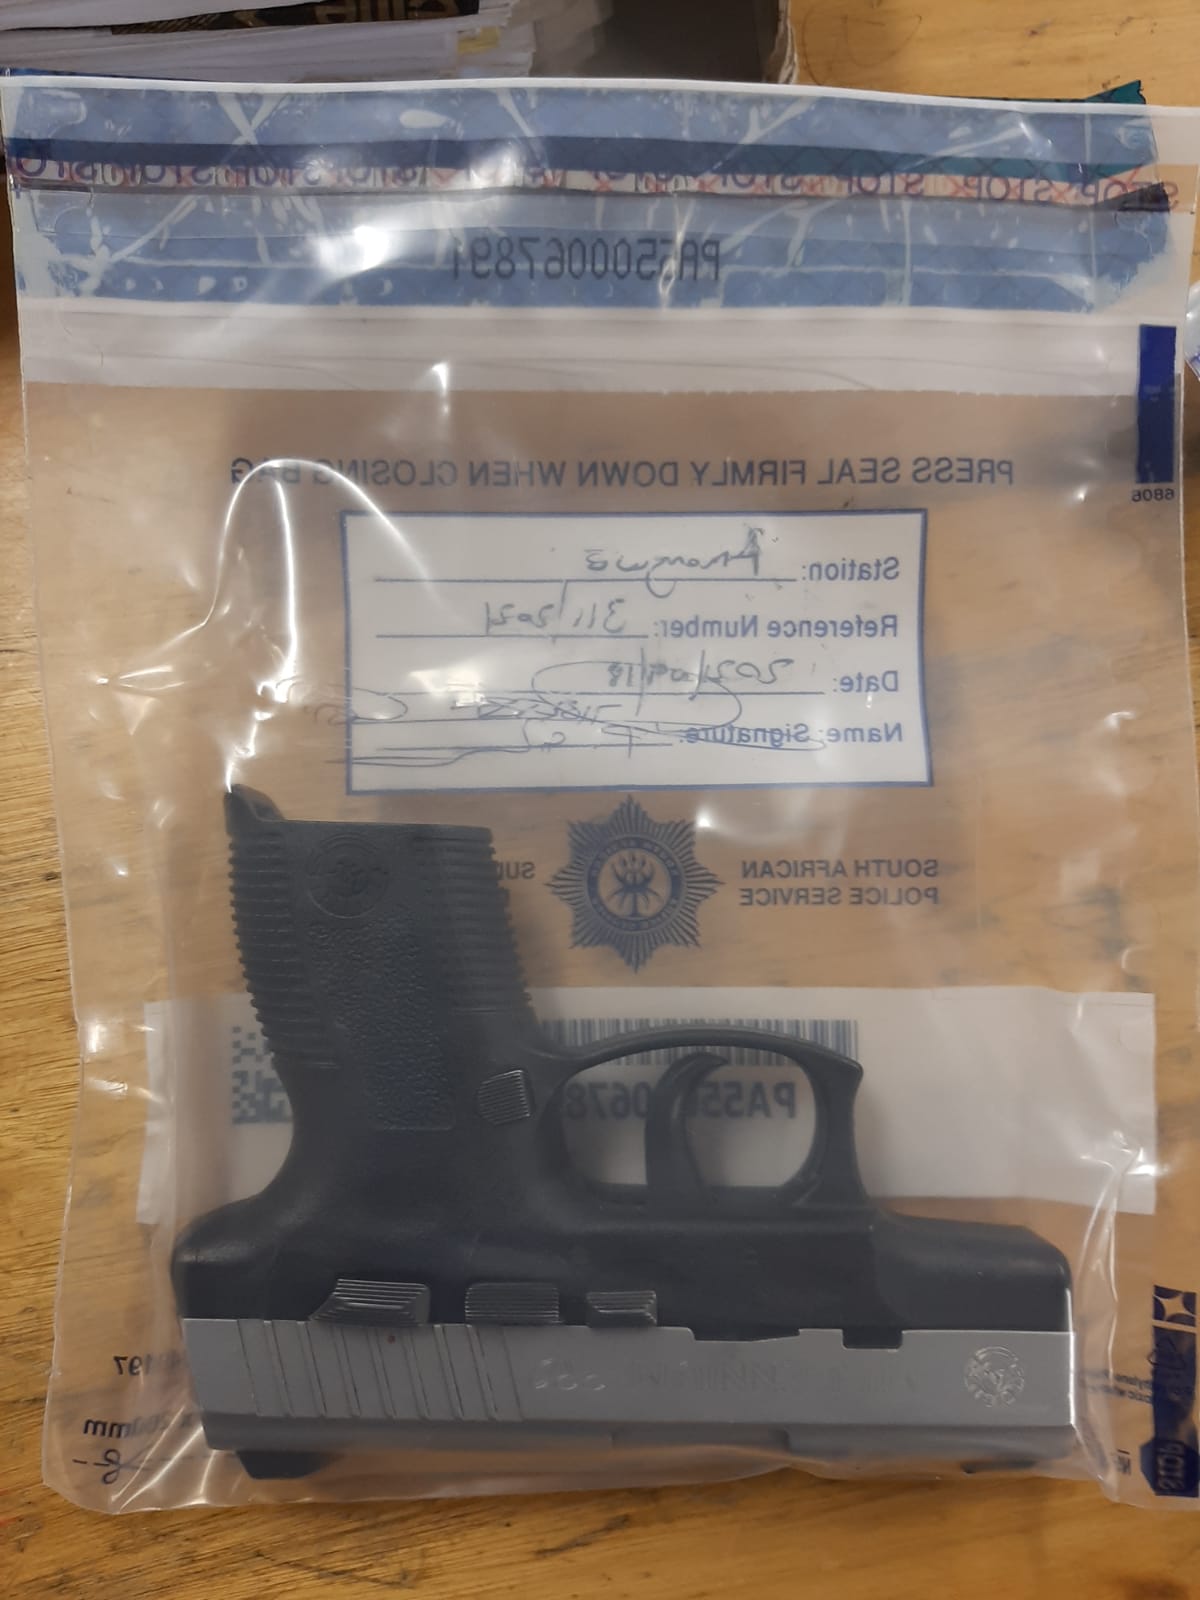 Four men arrested with unlicensed firearms